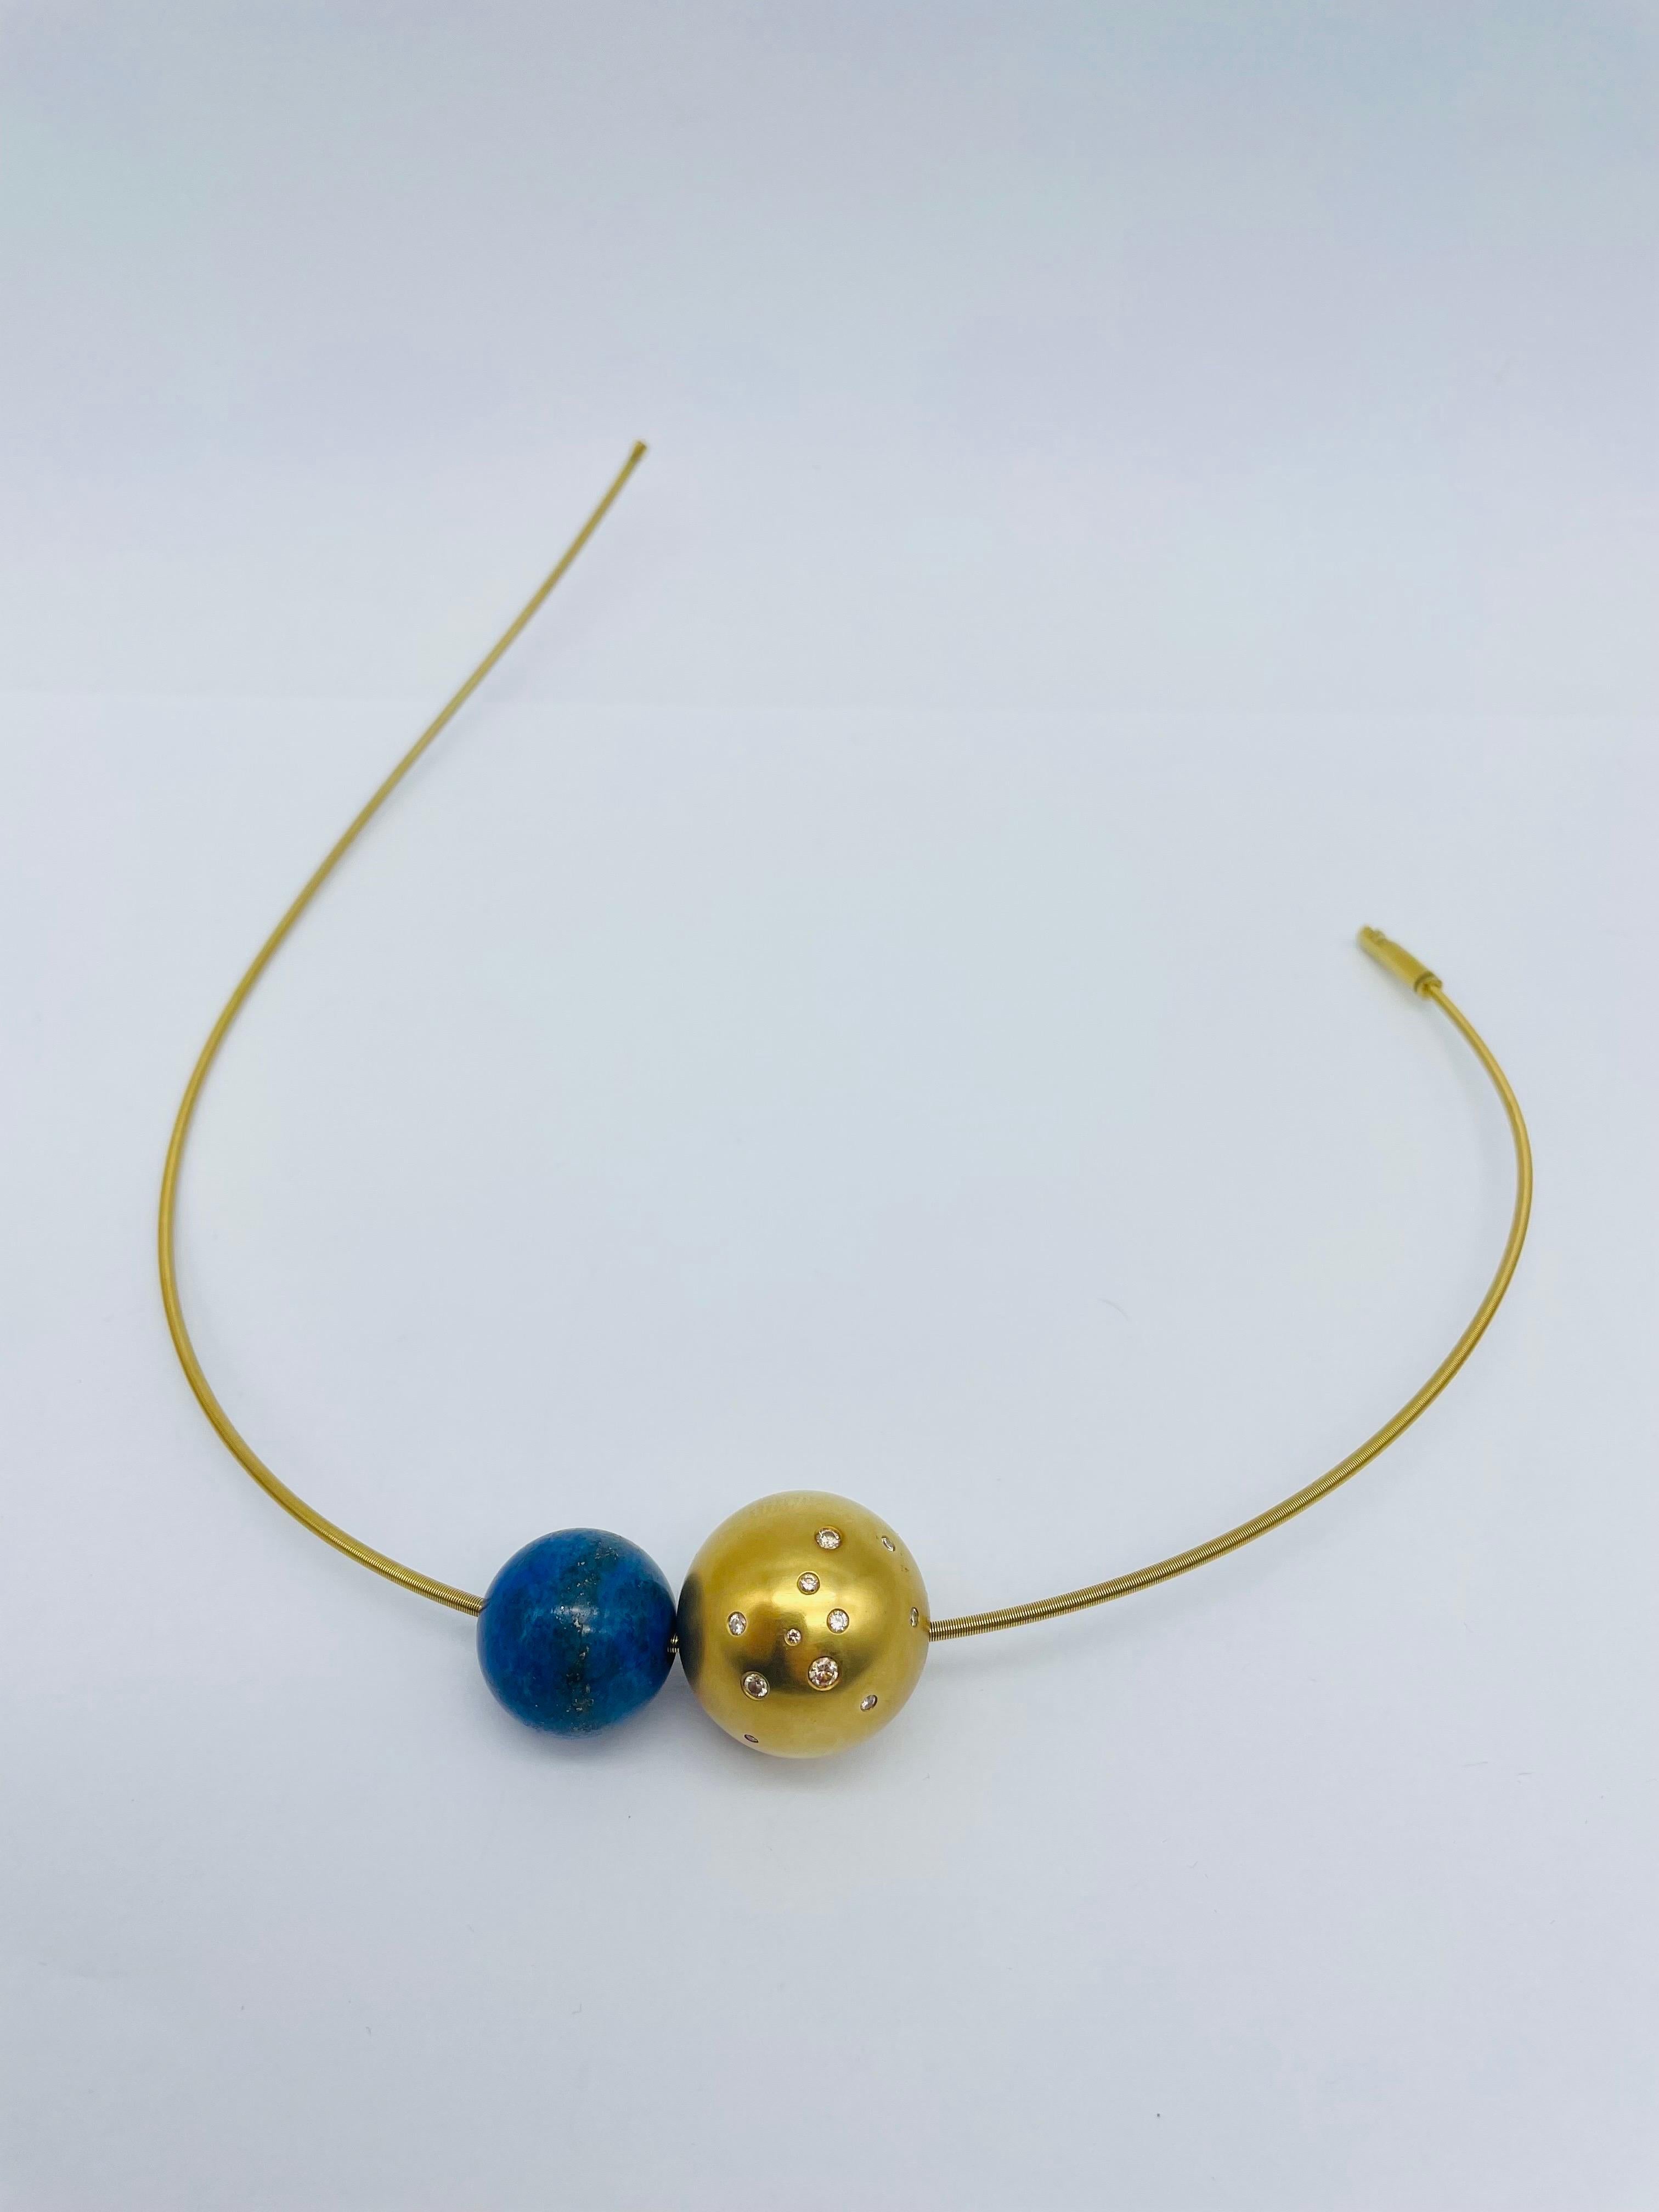 Brilliant Cut Extravagant Necklace Niessing Made of 18k Yellow Gold For Sale